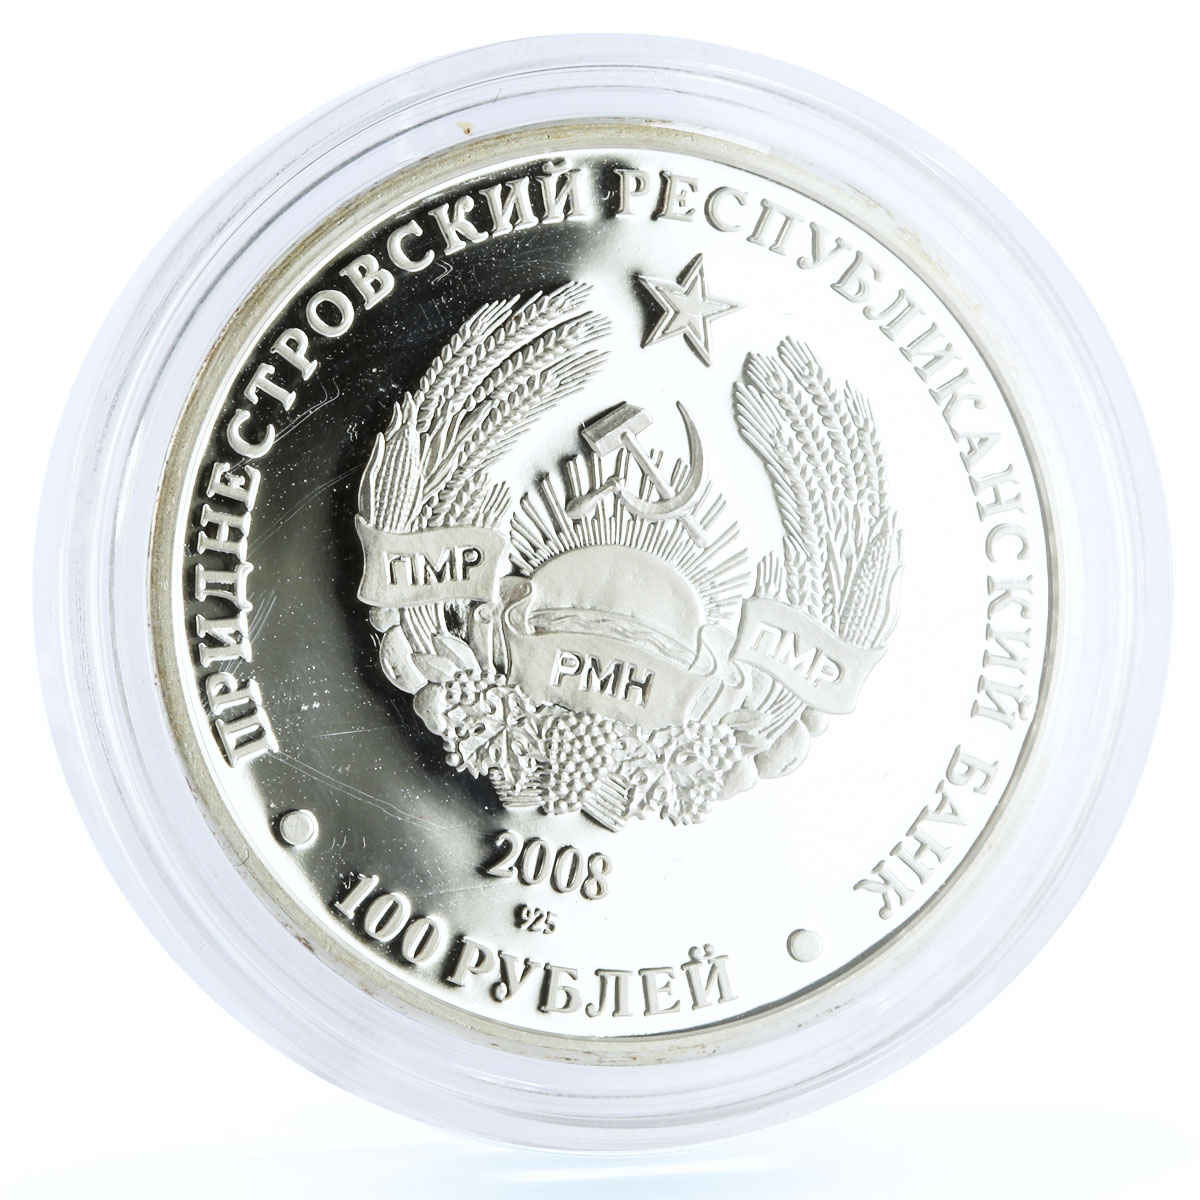 Transnistria 100 rubles Year of the Earth Rat Horoscope Fauna silver coin 2008